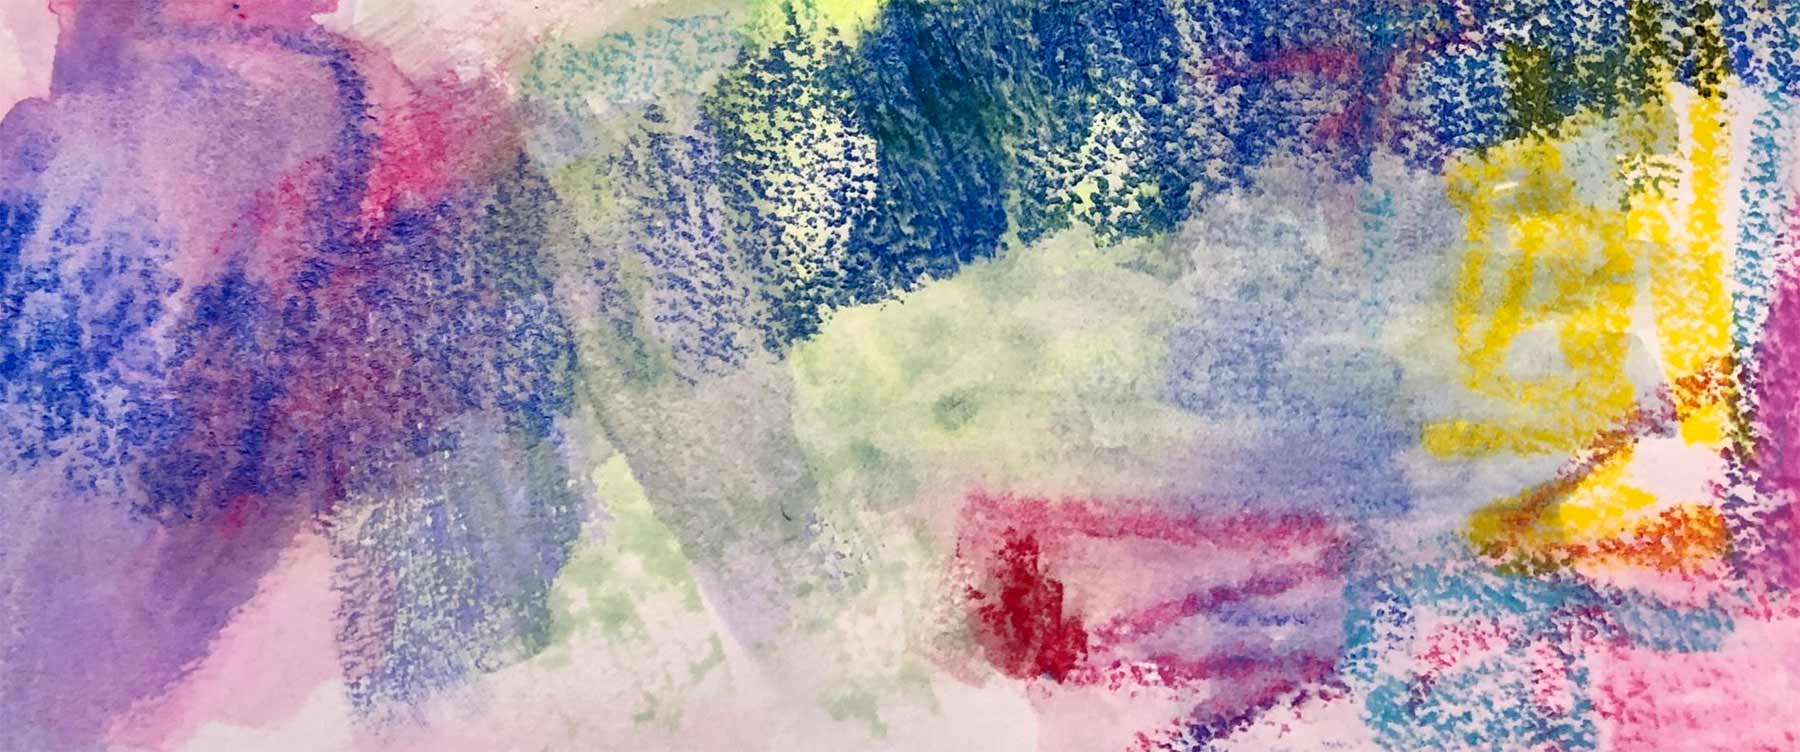 colorful abstract watercolor painting by Next Step